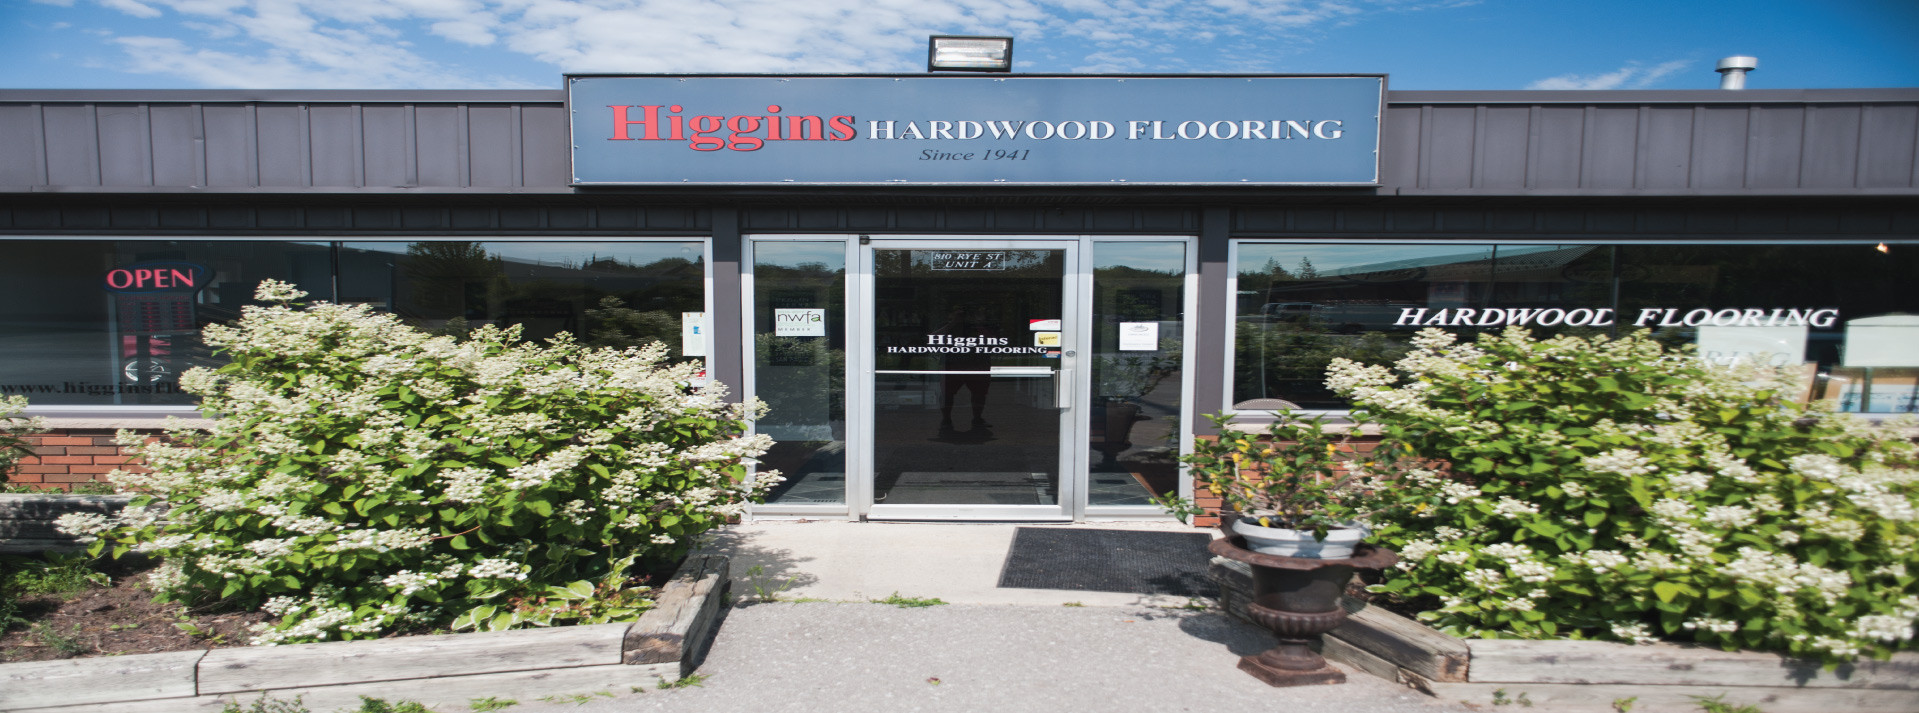 20 Elegant How Much Does It Cost to Refinish Hardwood Floors Canada 2024 free download how much does it cost to refinish hardwood floors canada of higgins hardwood flooring in peterborough oshawa lindsay ajax with regard to read more